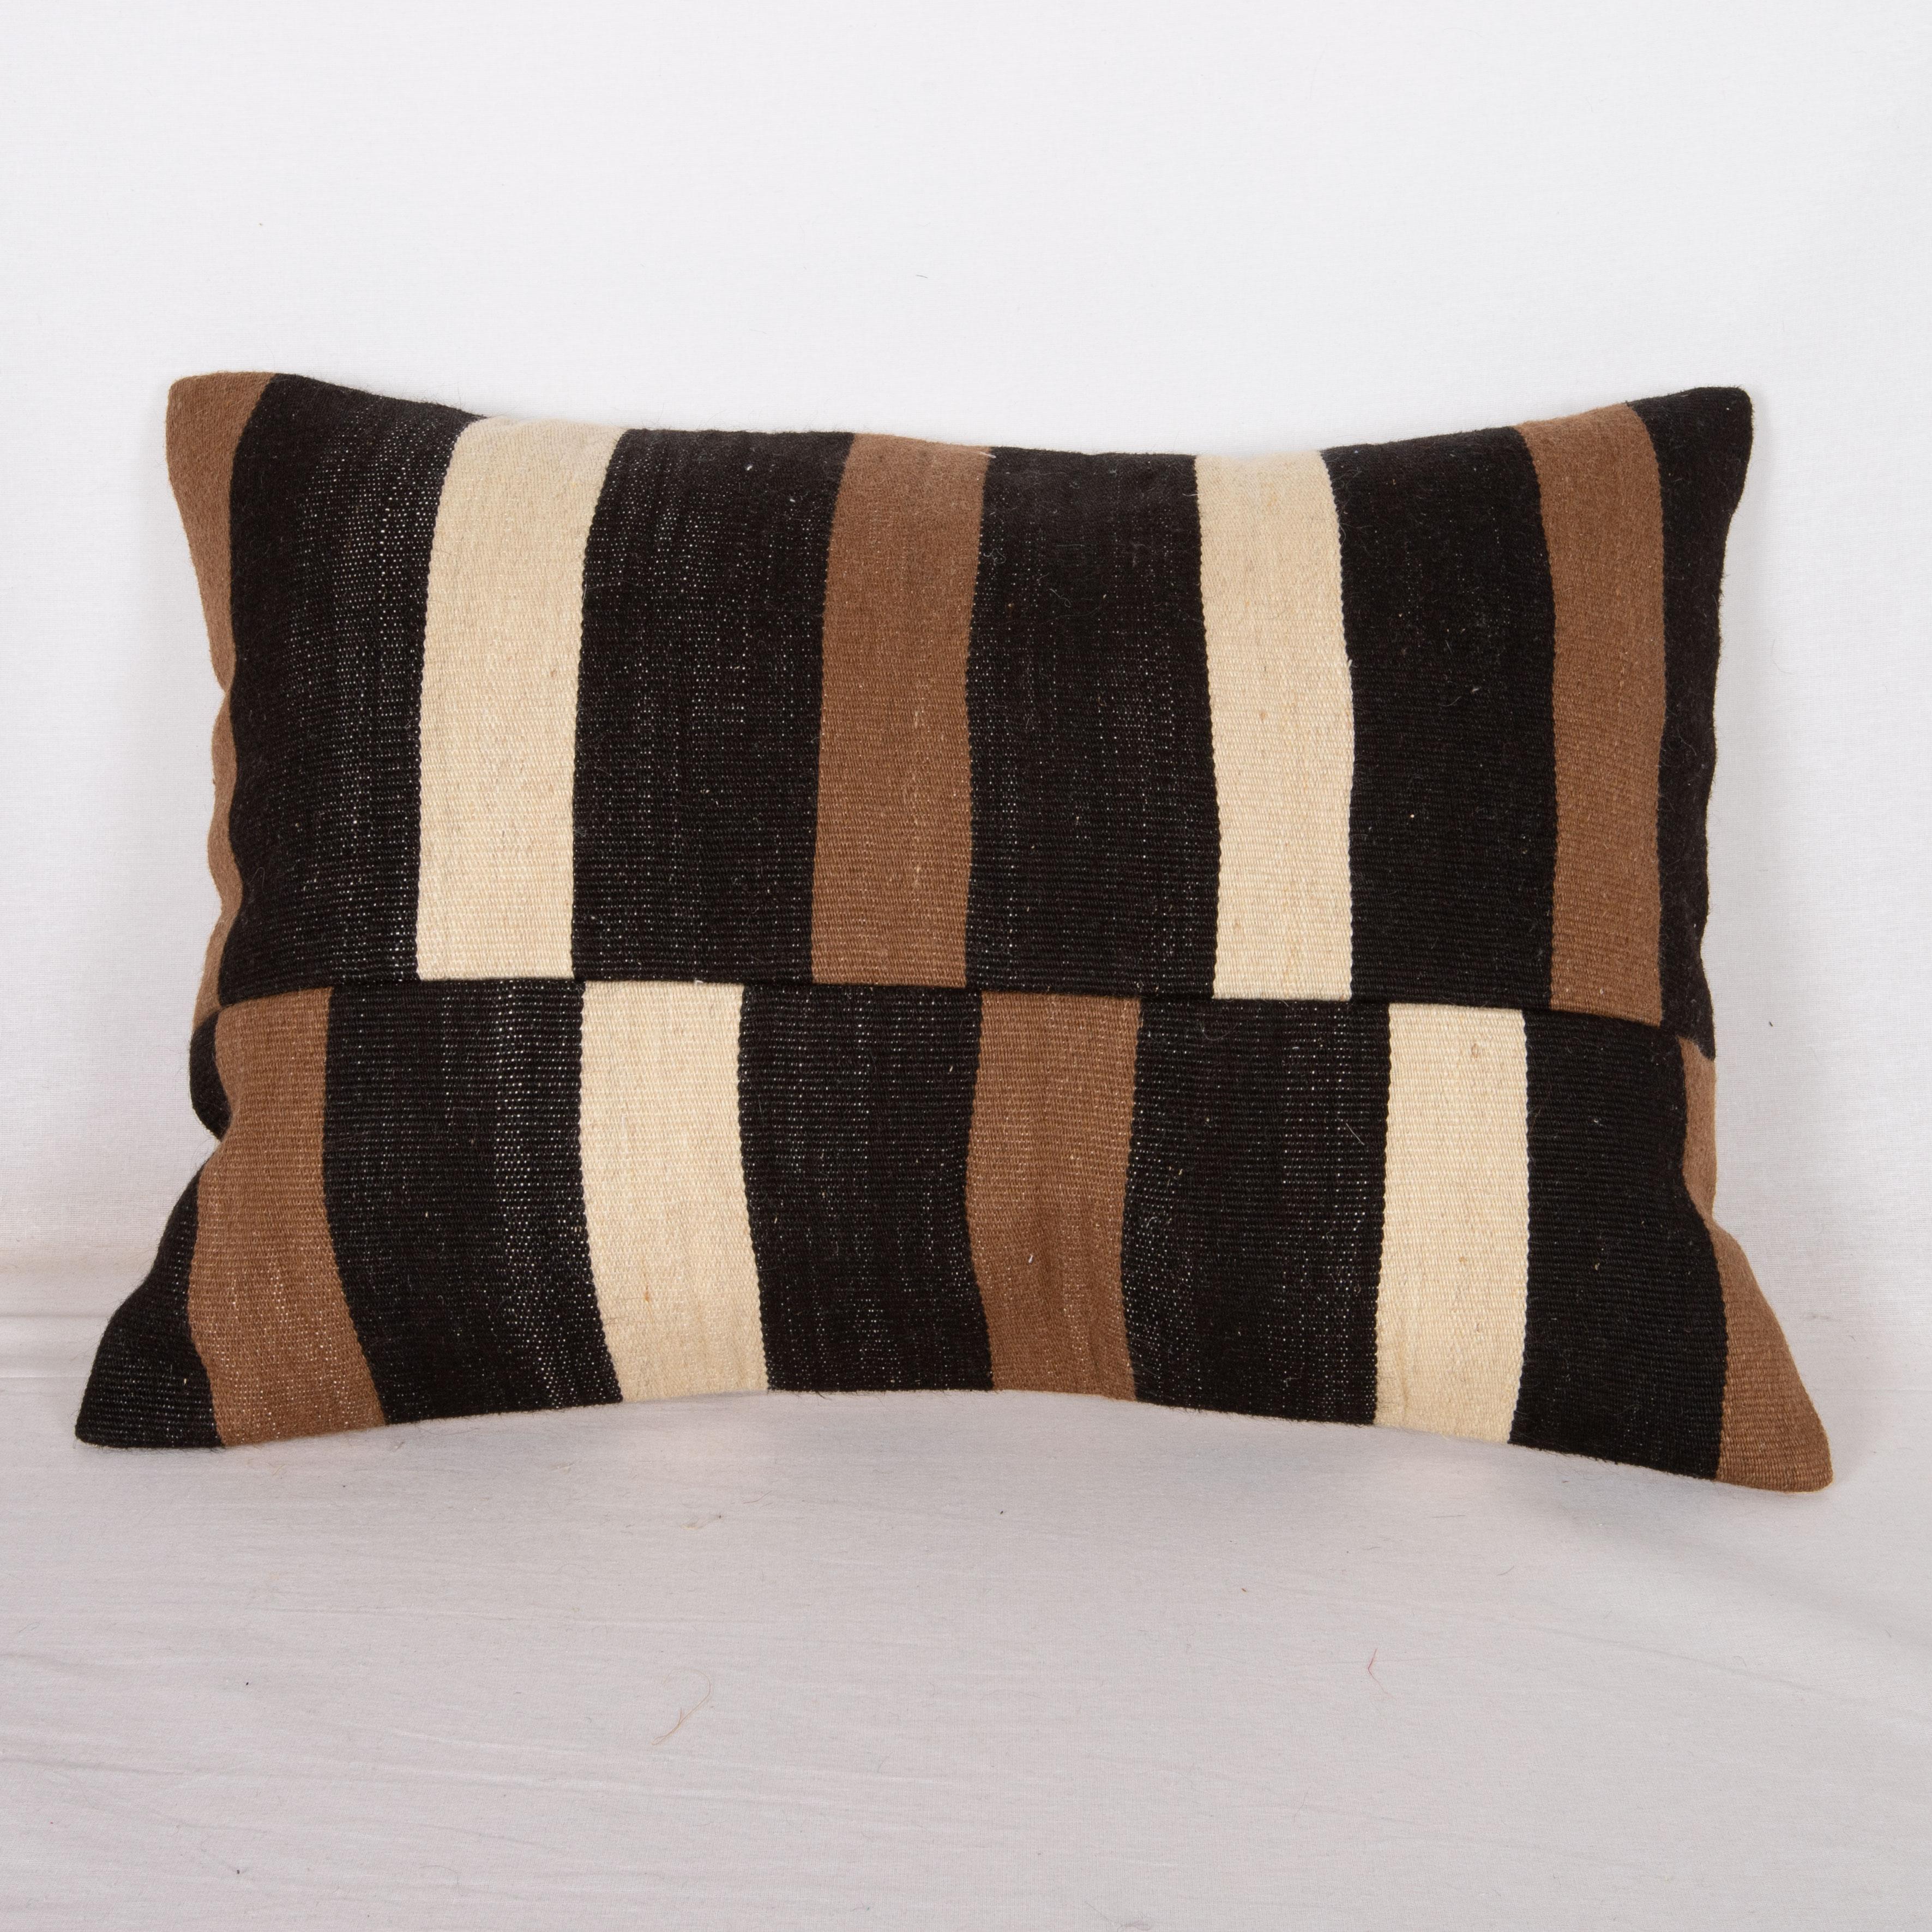 These pillows are made from vintage Angora Siirt (a city in the South East of Turkey) .
Siirt is famous for these blankets made from the hair of angora goat. Angora is believed to name after the capital city of Turkey, Ankara or the opposite.
We